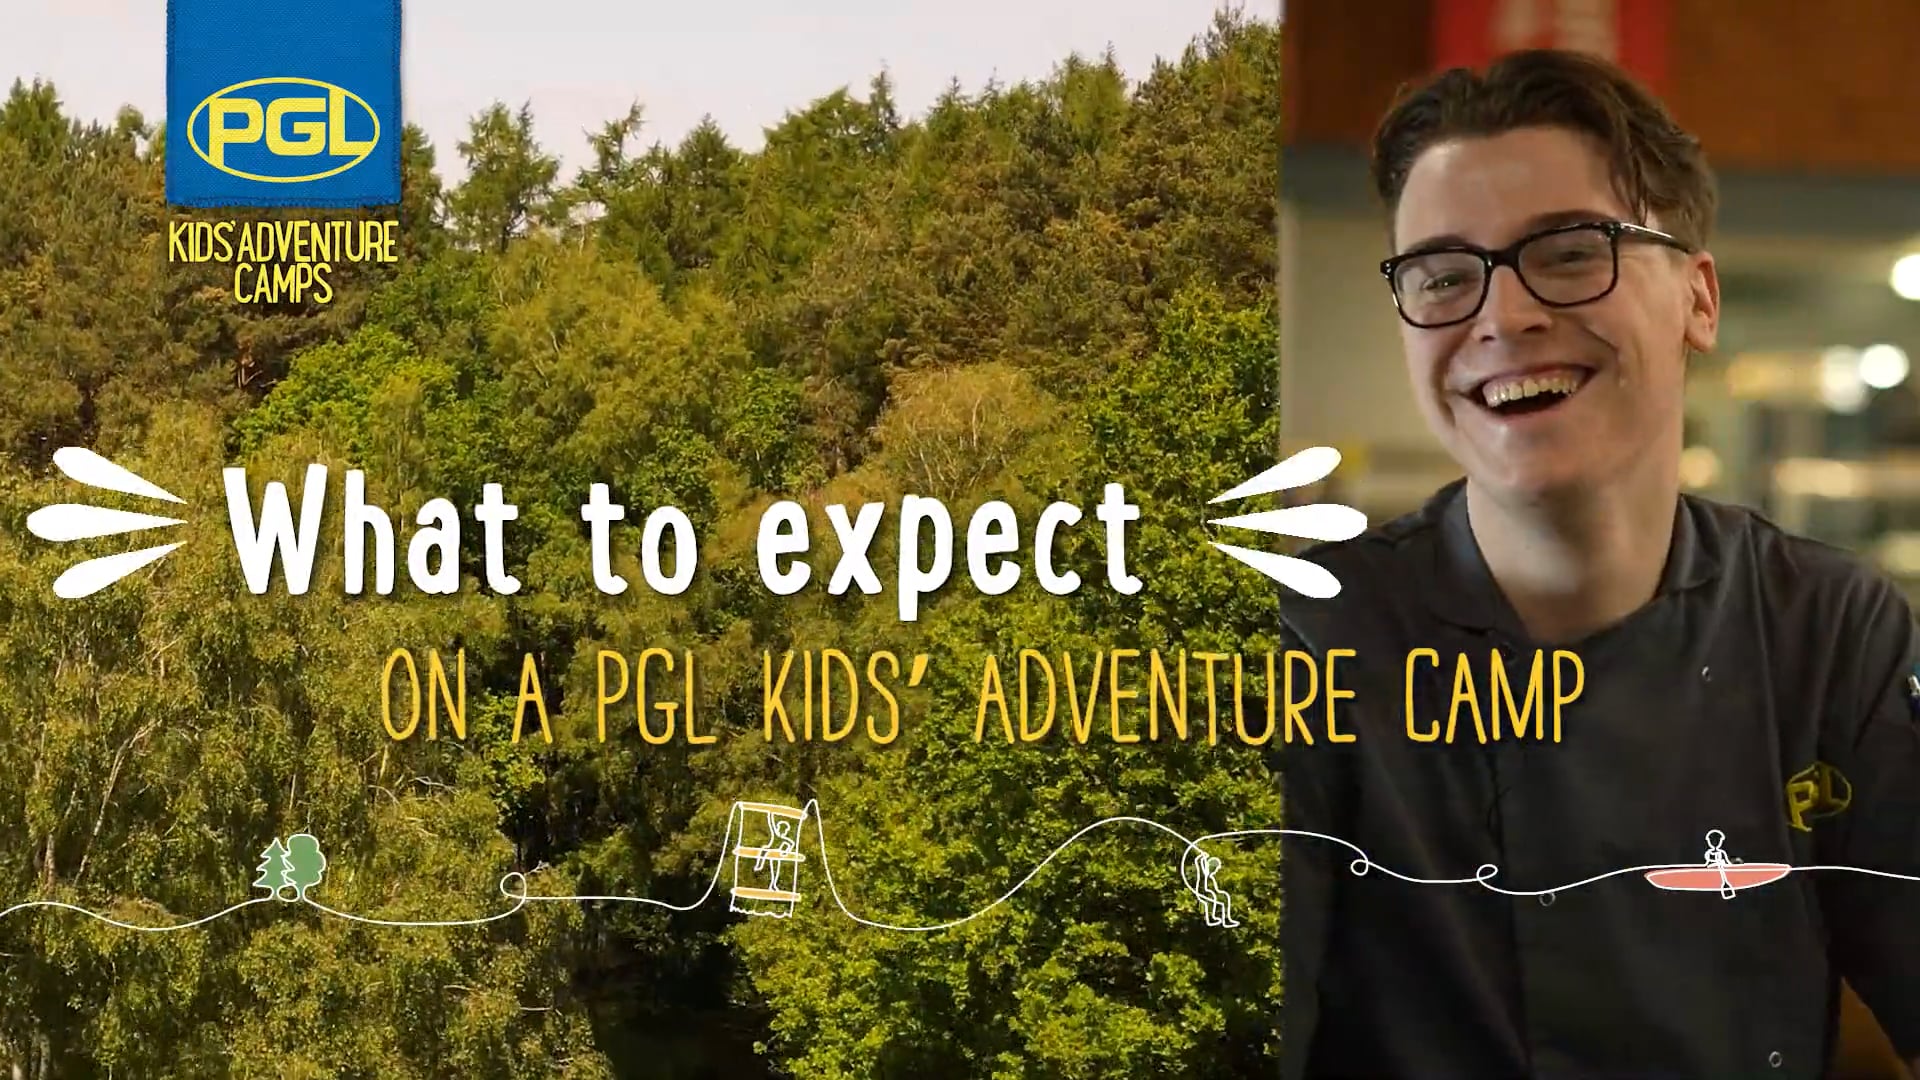 PGL Adventure Holidays Kids' Camp promotional image featuring a smiling person against a forest background with the text "What to expect on a PGL Kids' Adventure Camp.